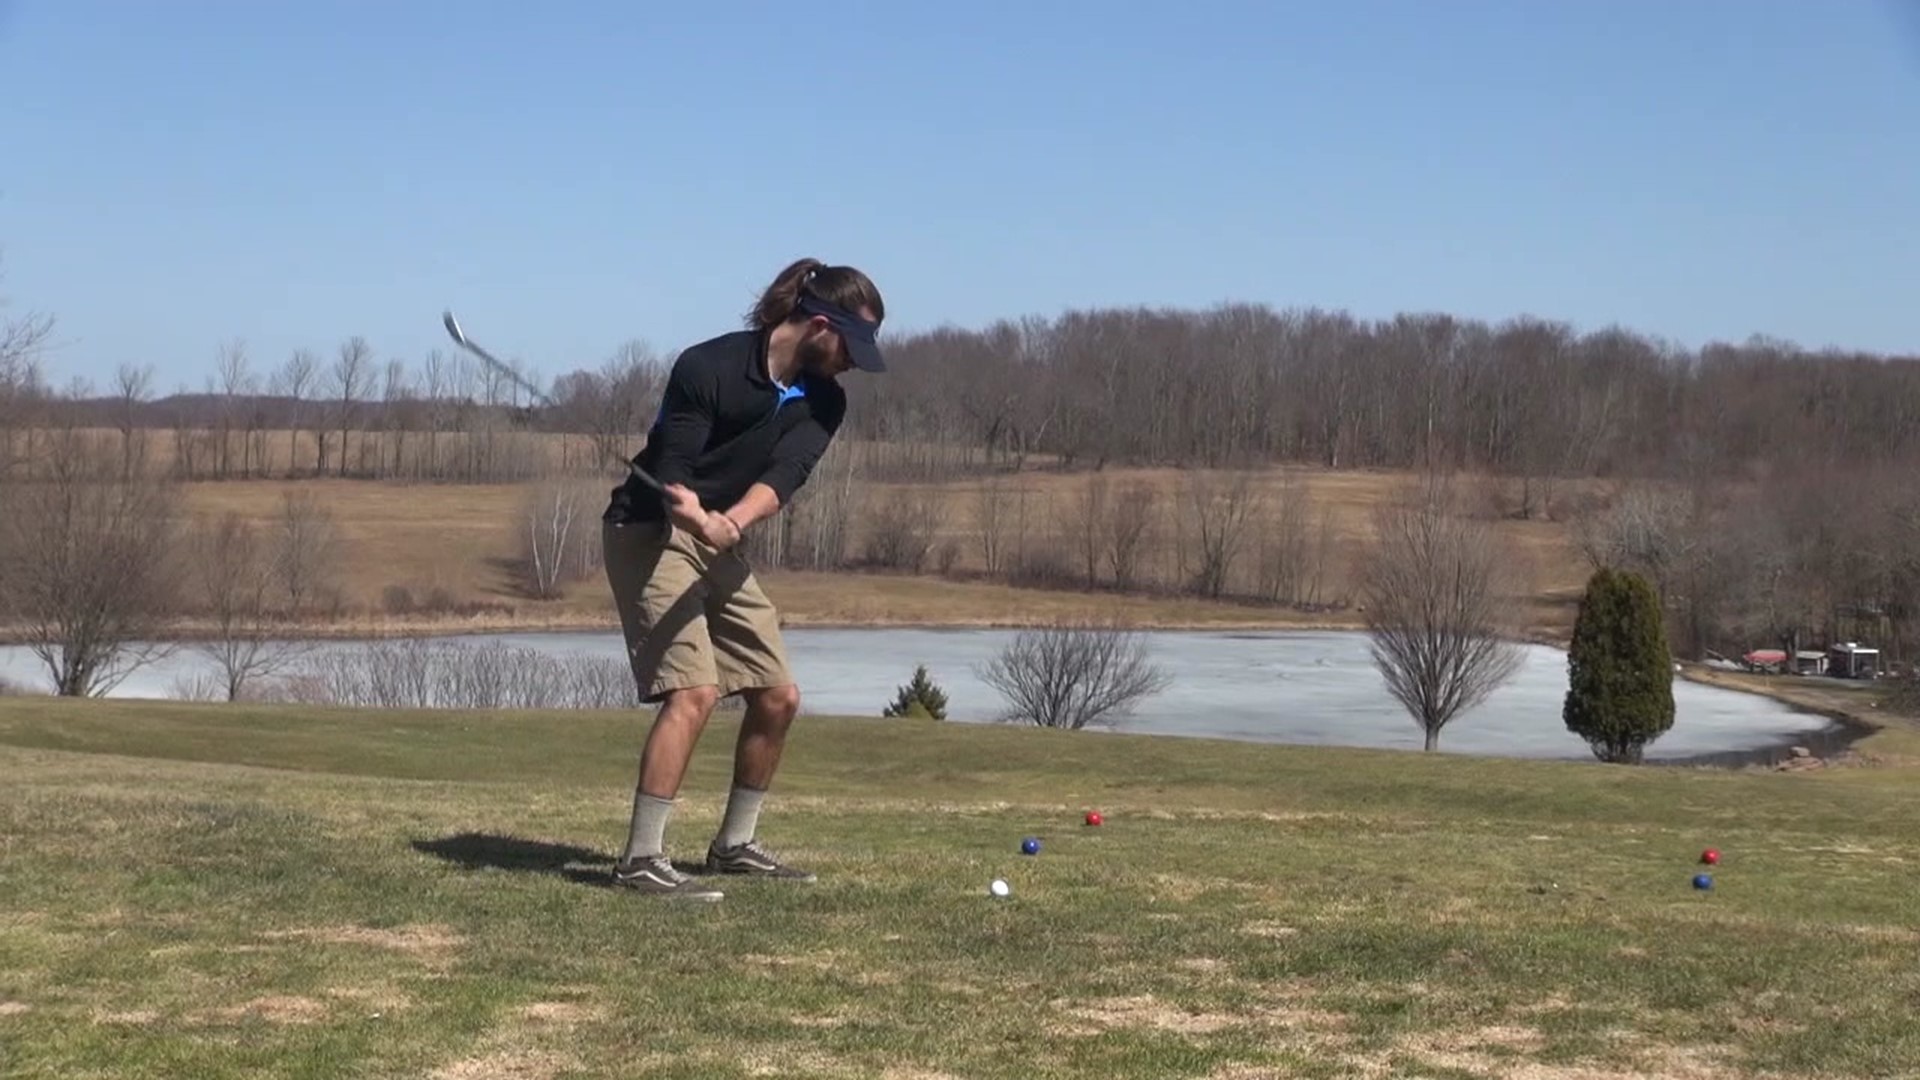 Newswatch 16's Courtney Harrison found a few golfers playing a round in Wayne County while taking advantage of the warm temperatures.